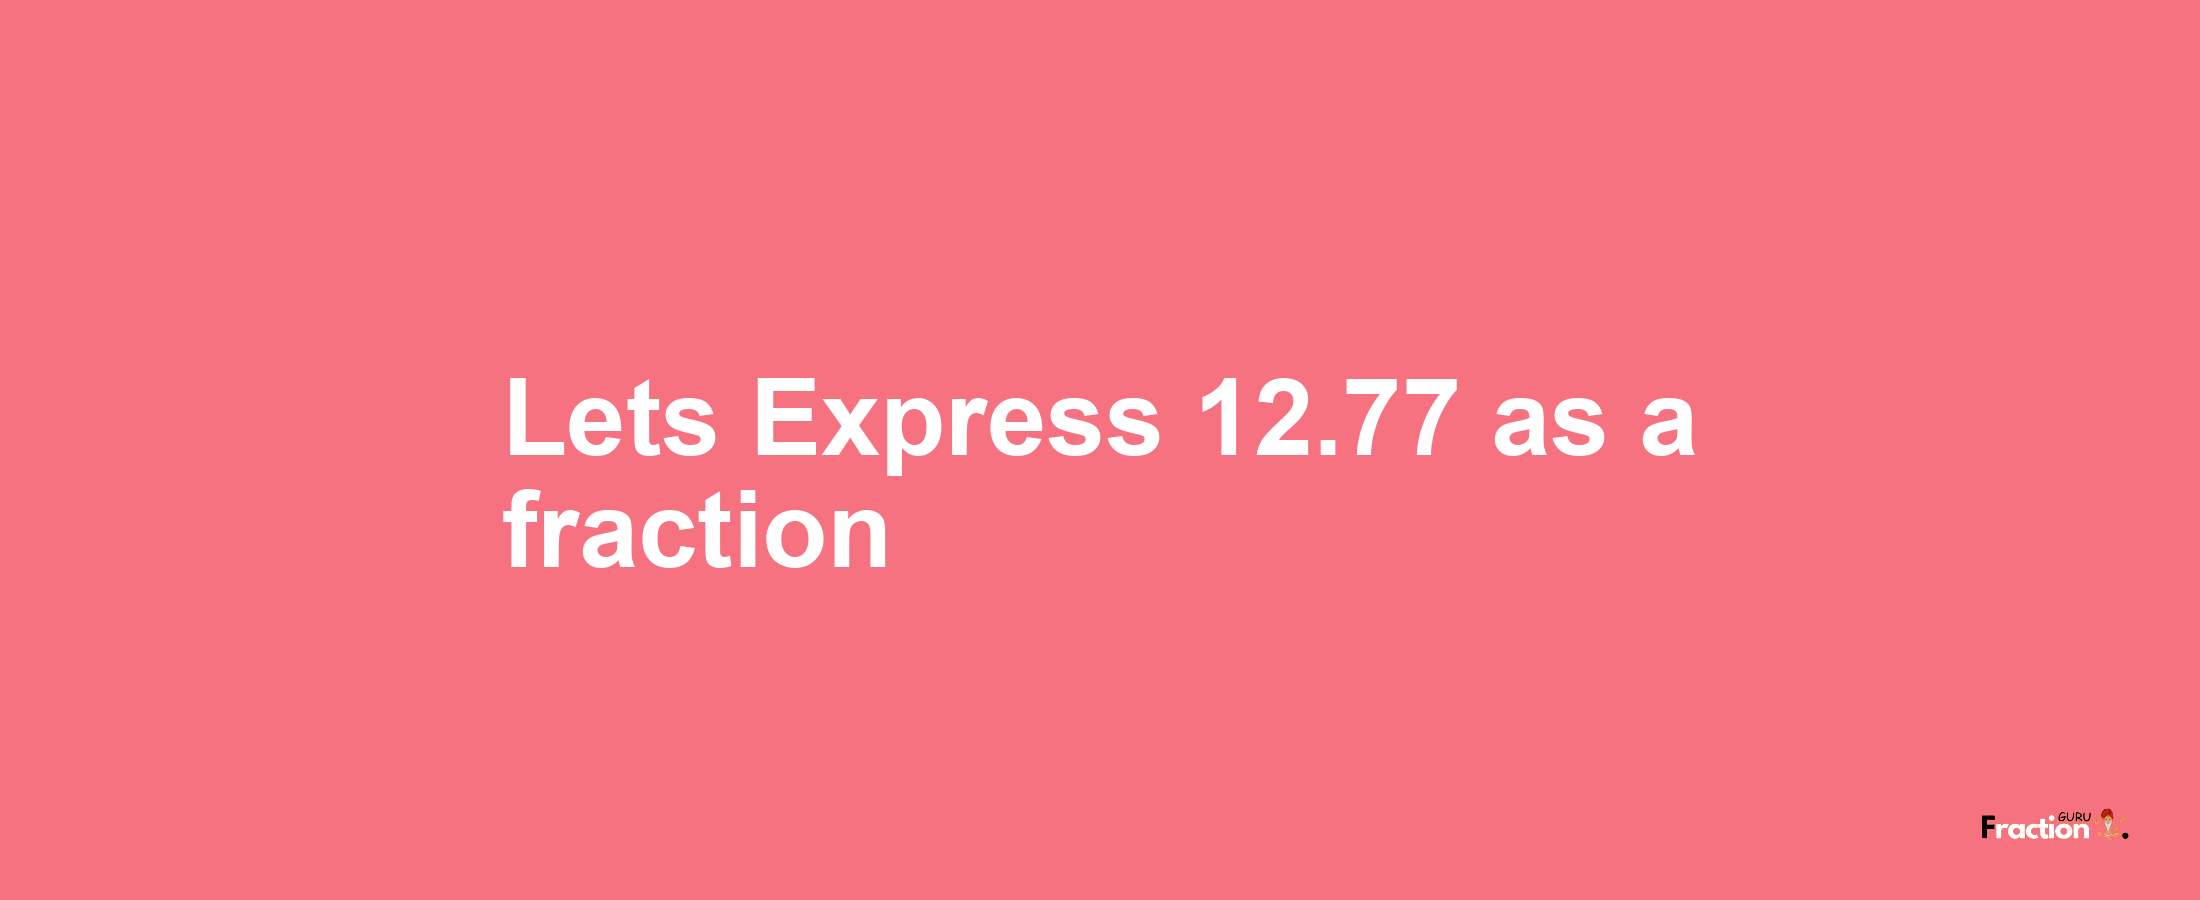 Lets Express 12.77 as afraction